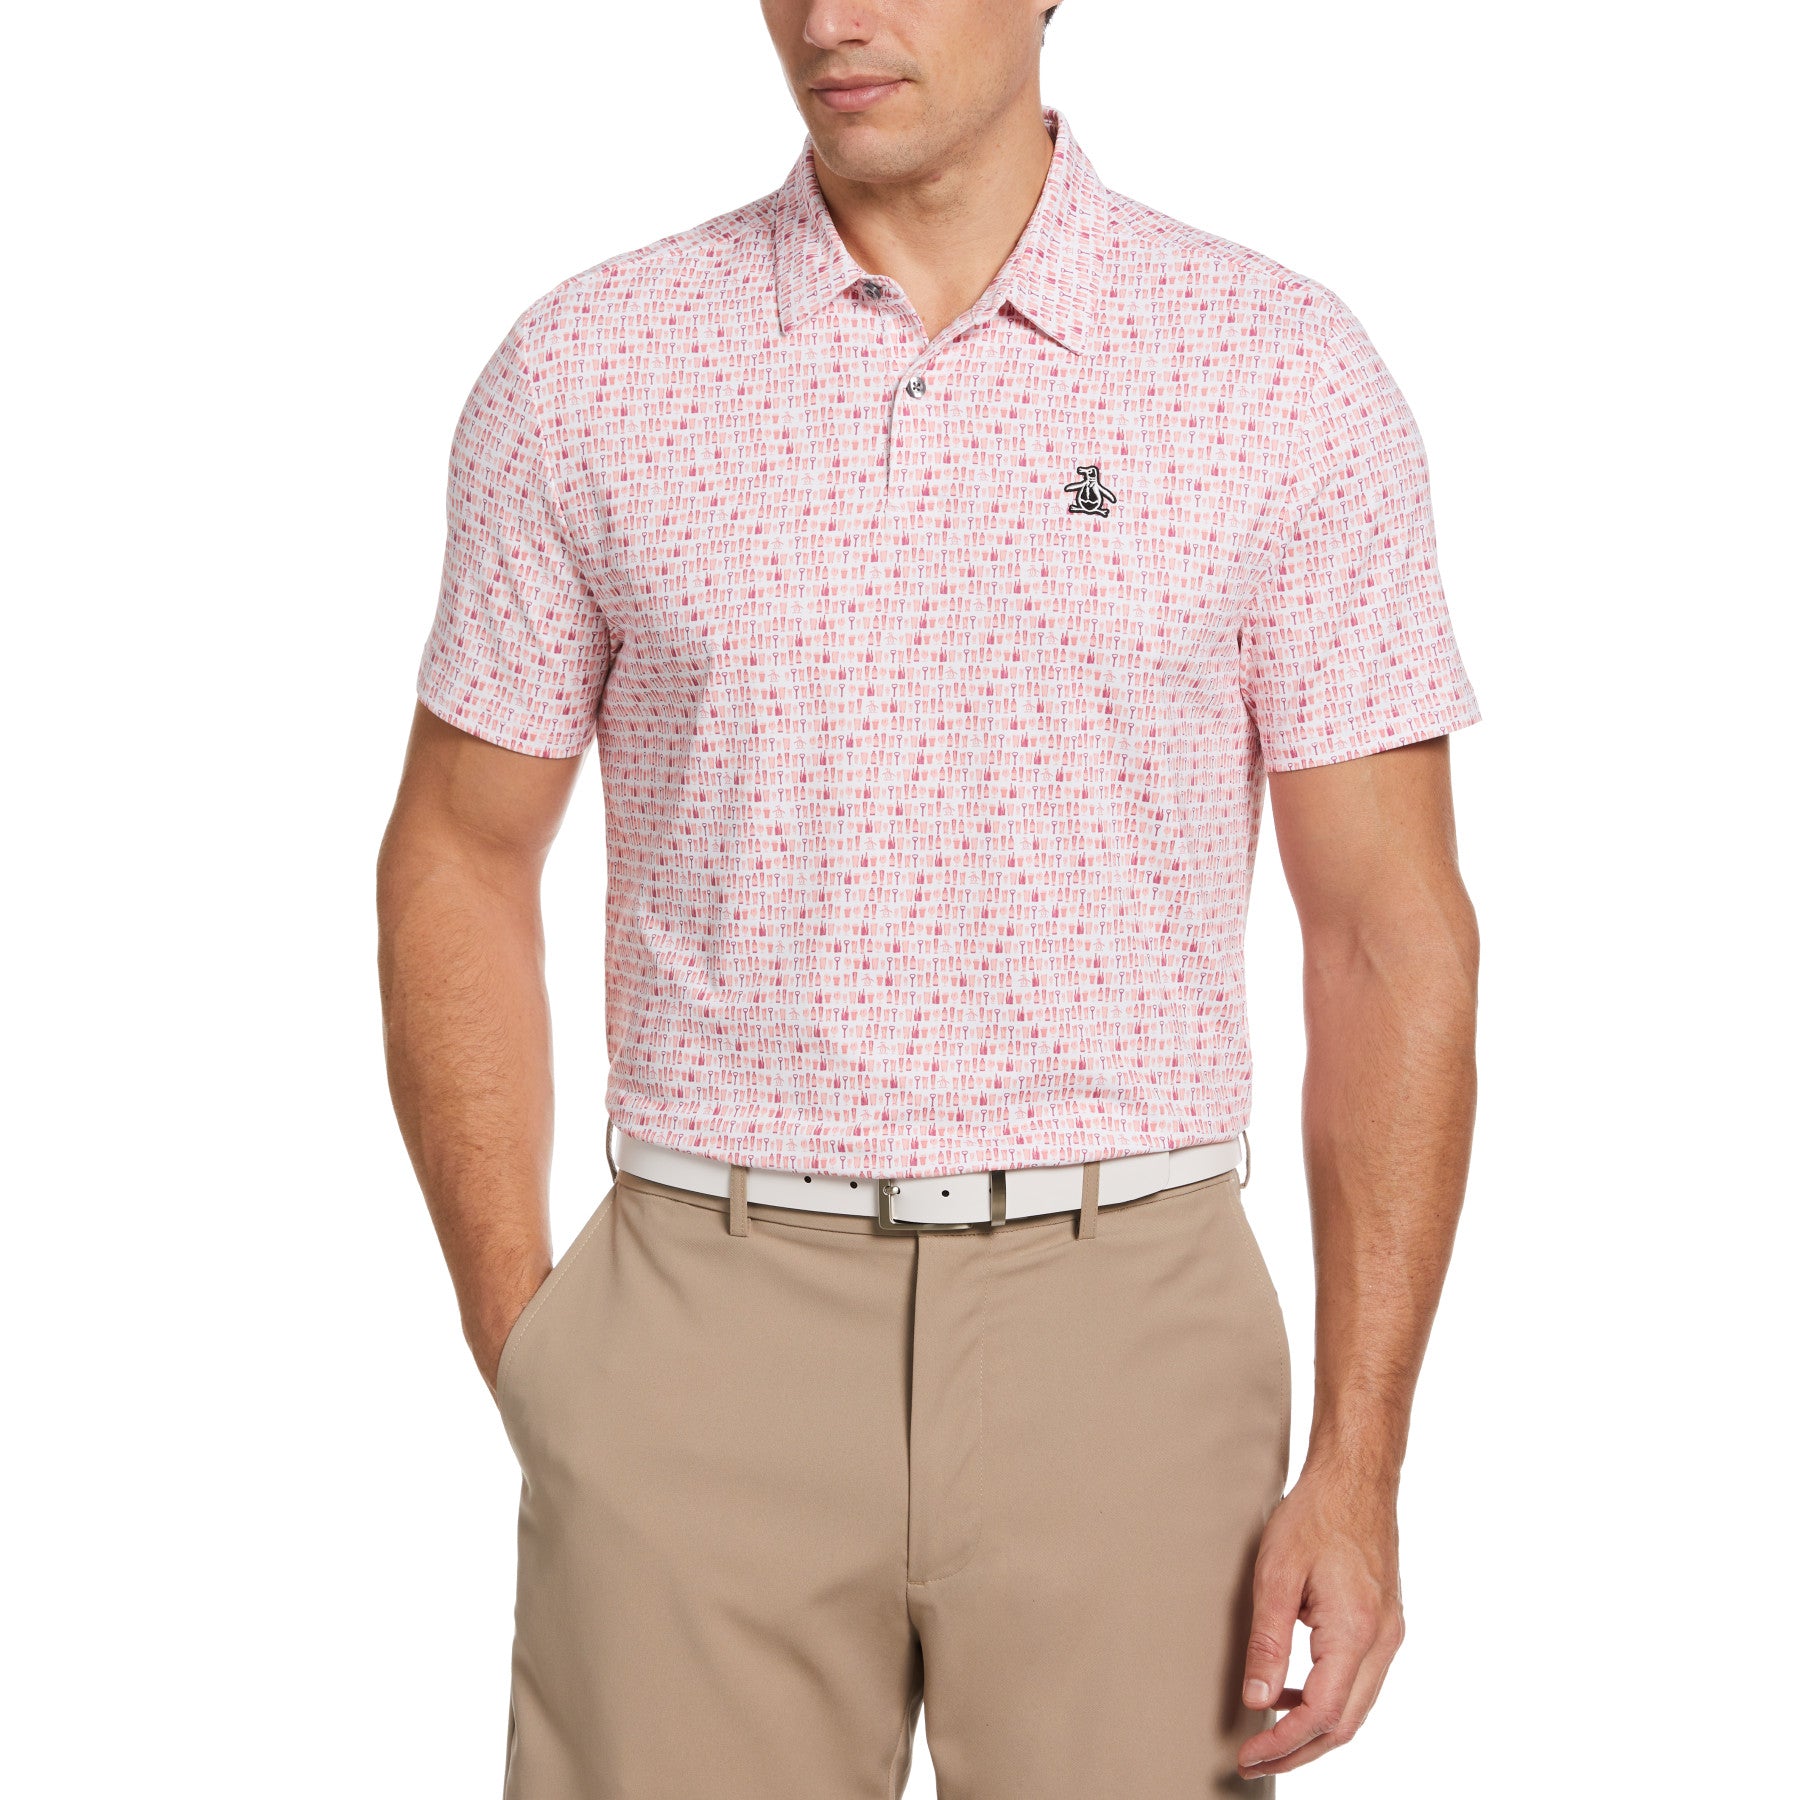 View Have A Beer Novelty Print Golf Polo Shirt In Rose Bouquet information